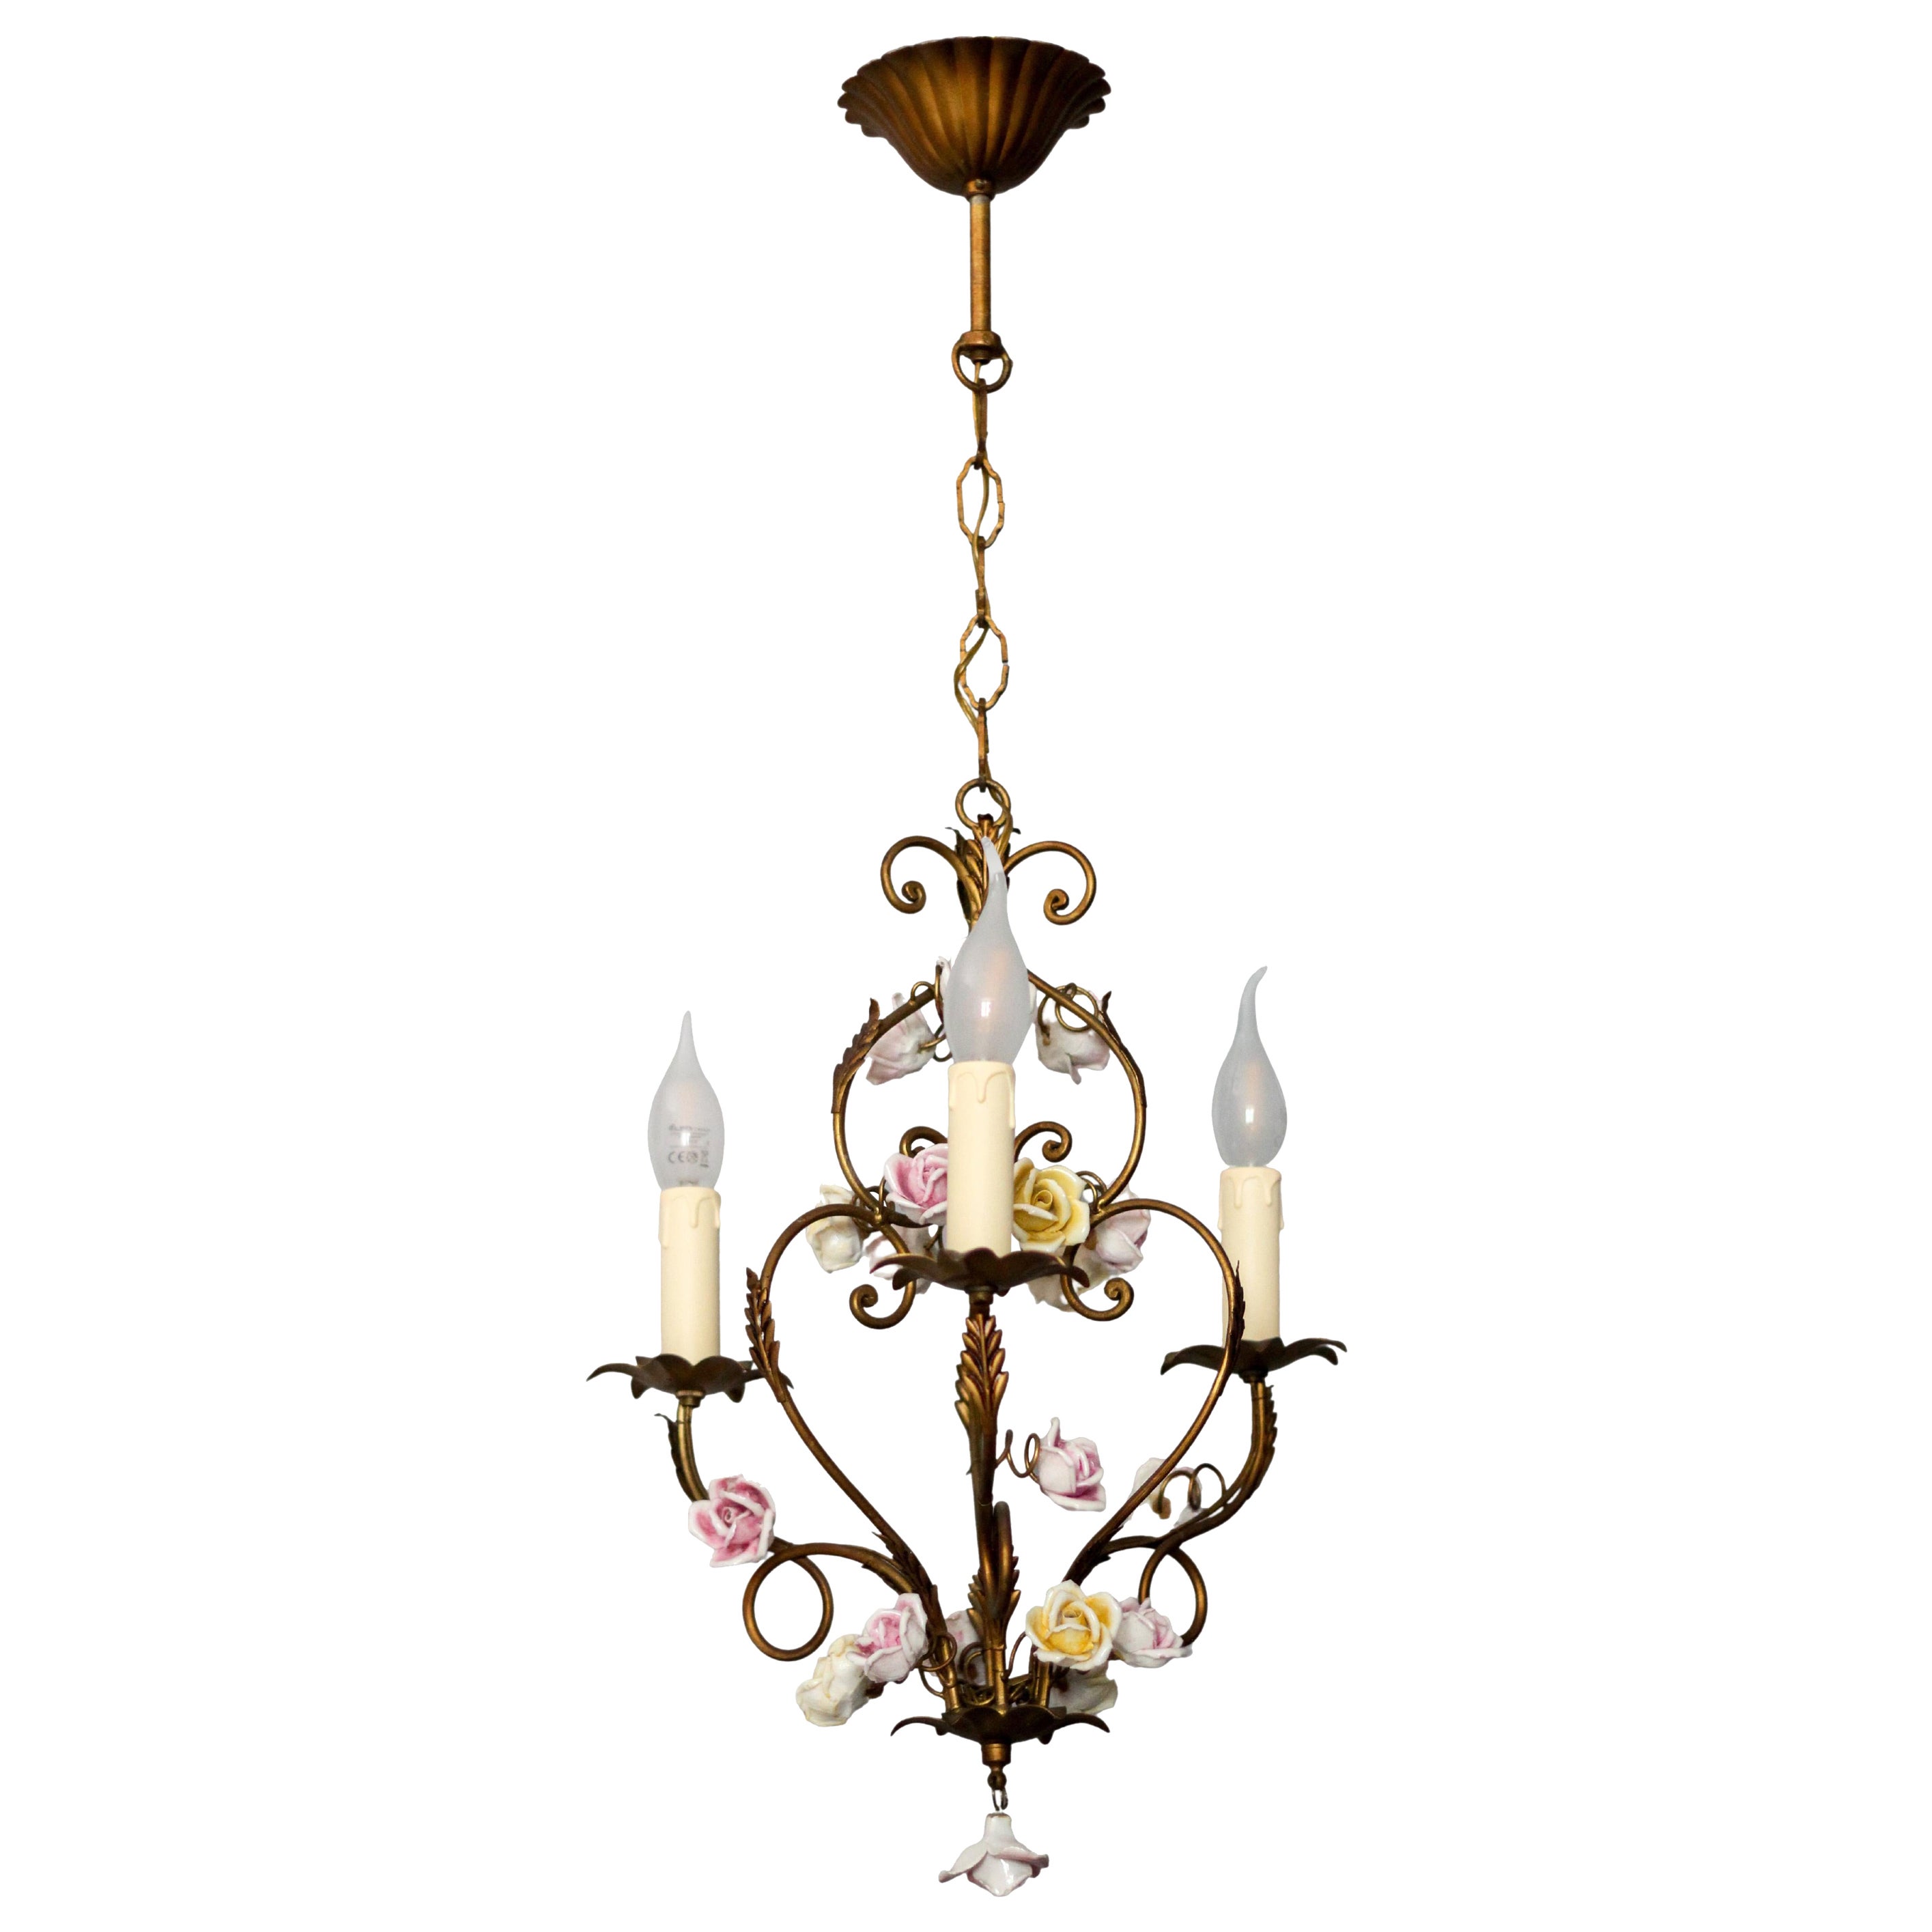 Italian Golden Metal Three-Light Chandelier with Porcelain Roses, ca. 1970s For Sale